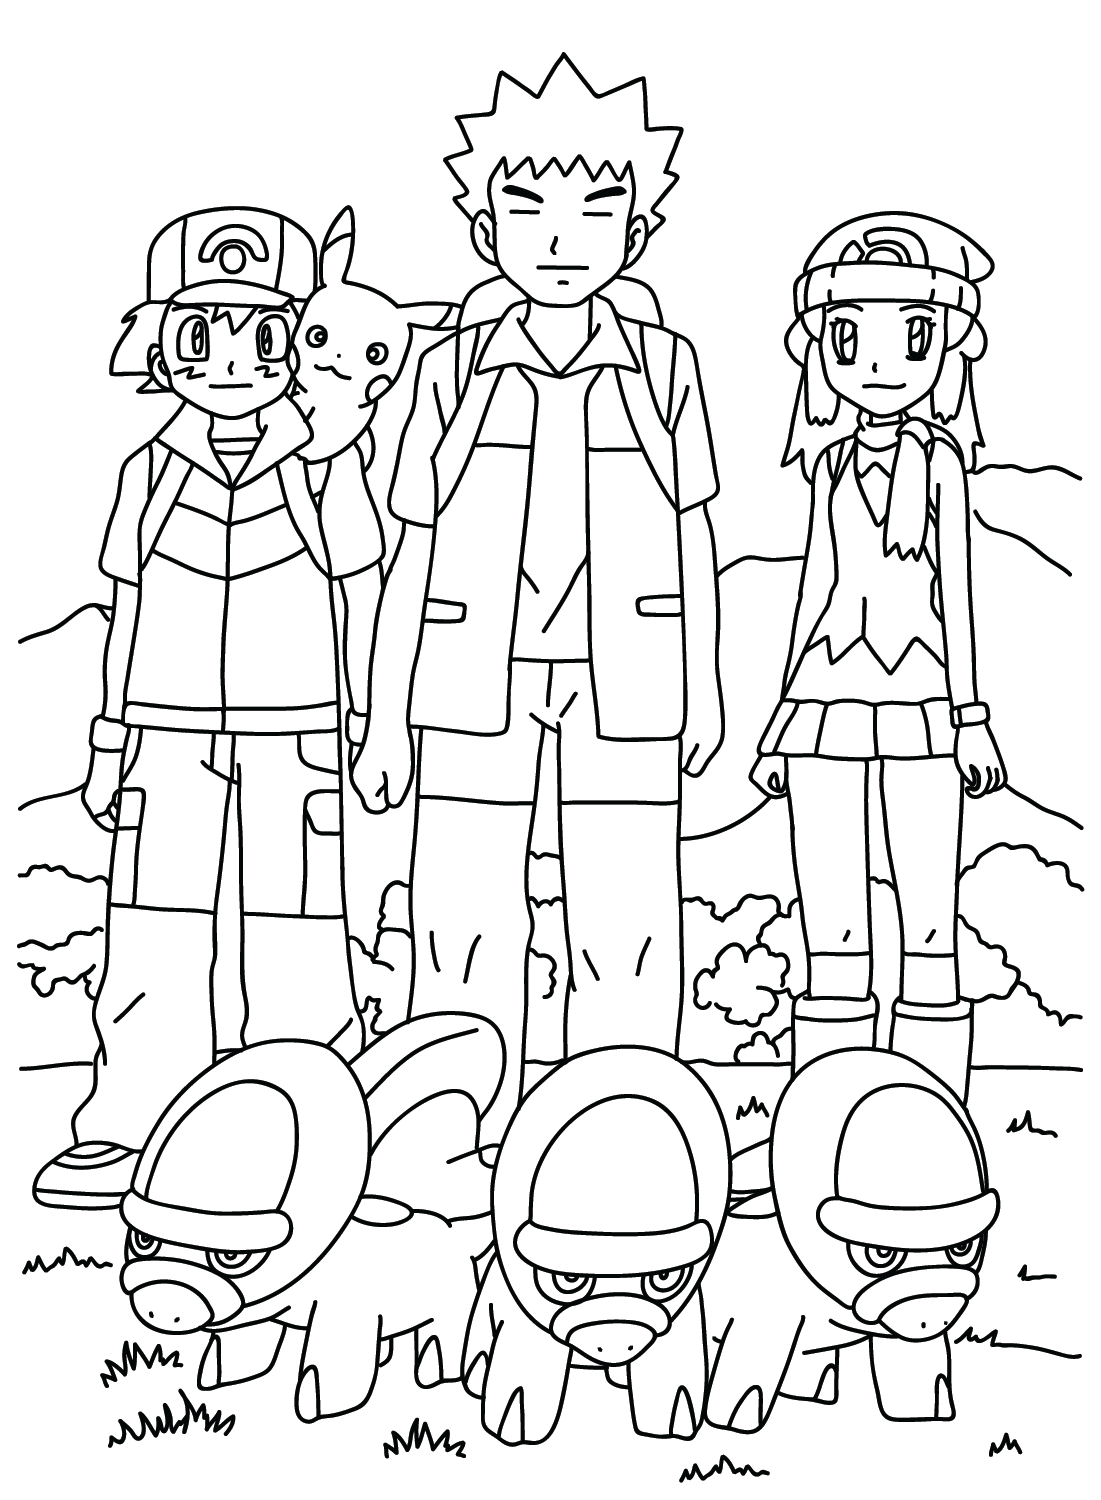 Brock Ash Dawn Coloring Page from Brock